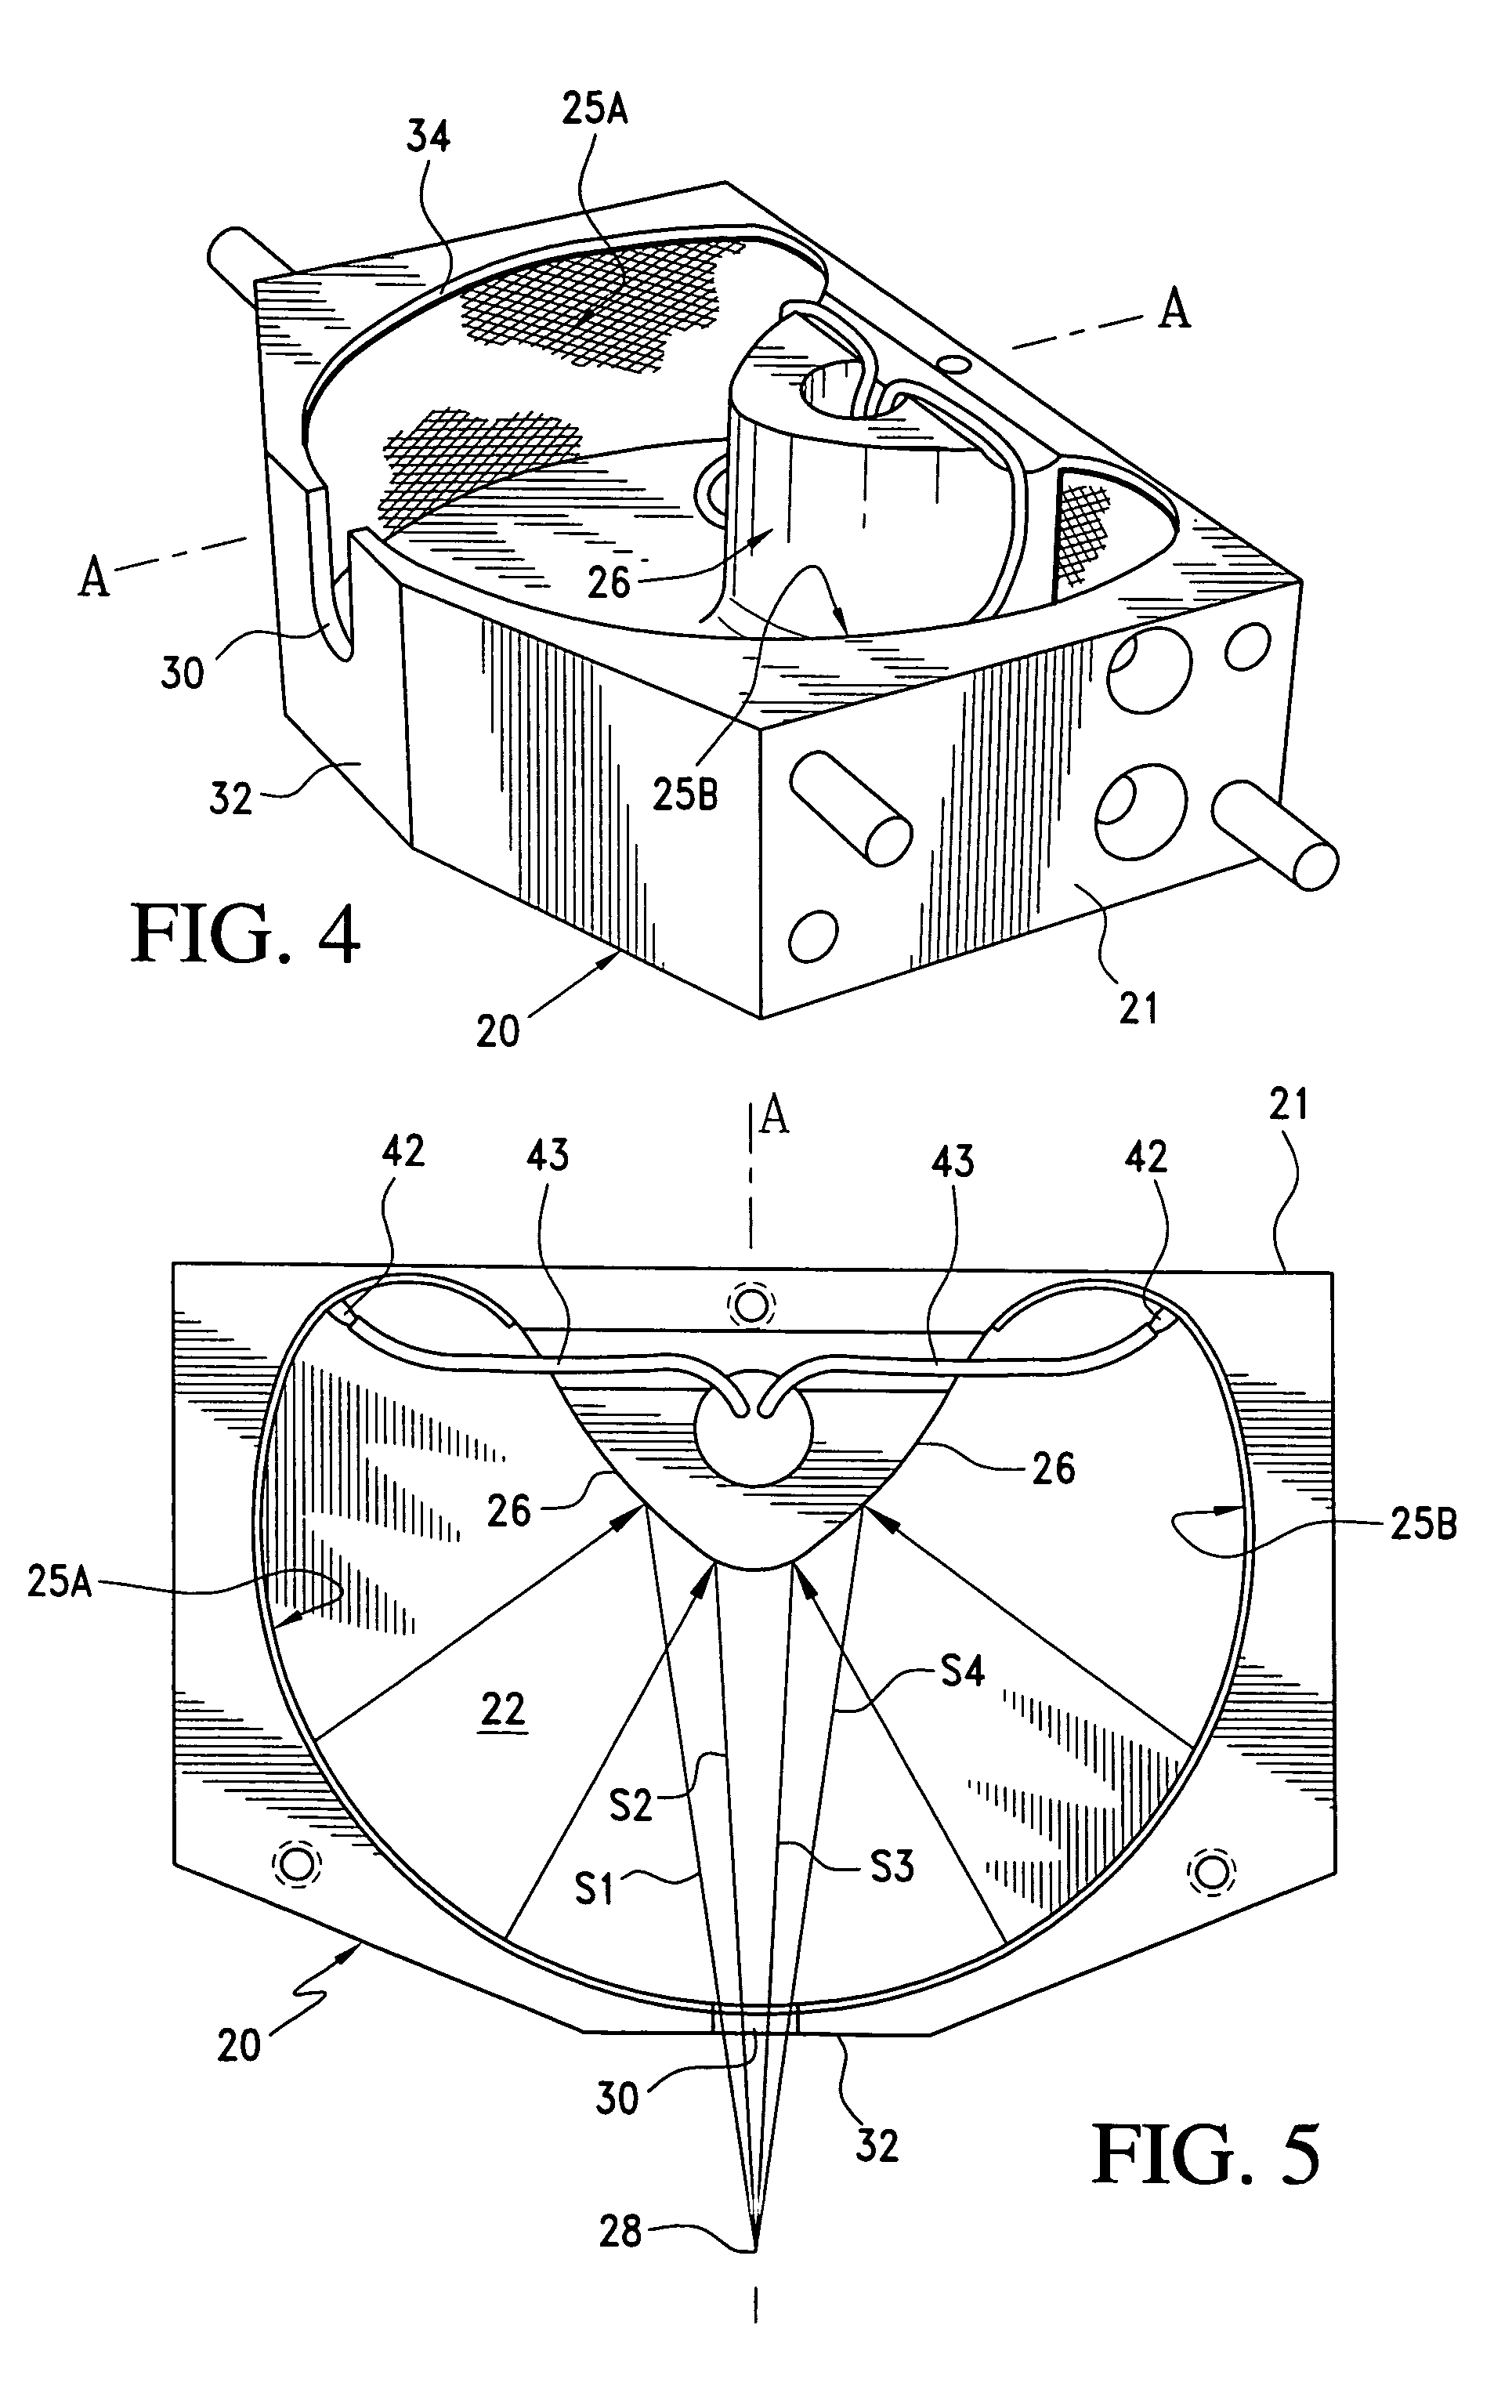 Transducers for focusing sonic energy in transmitting and receiving device